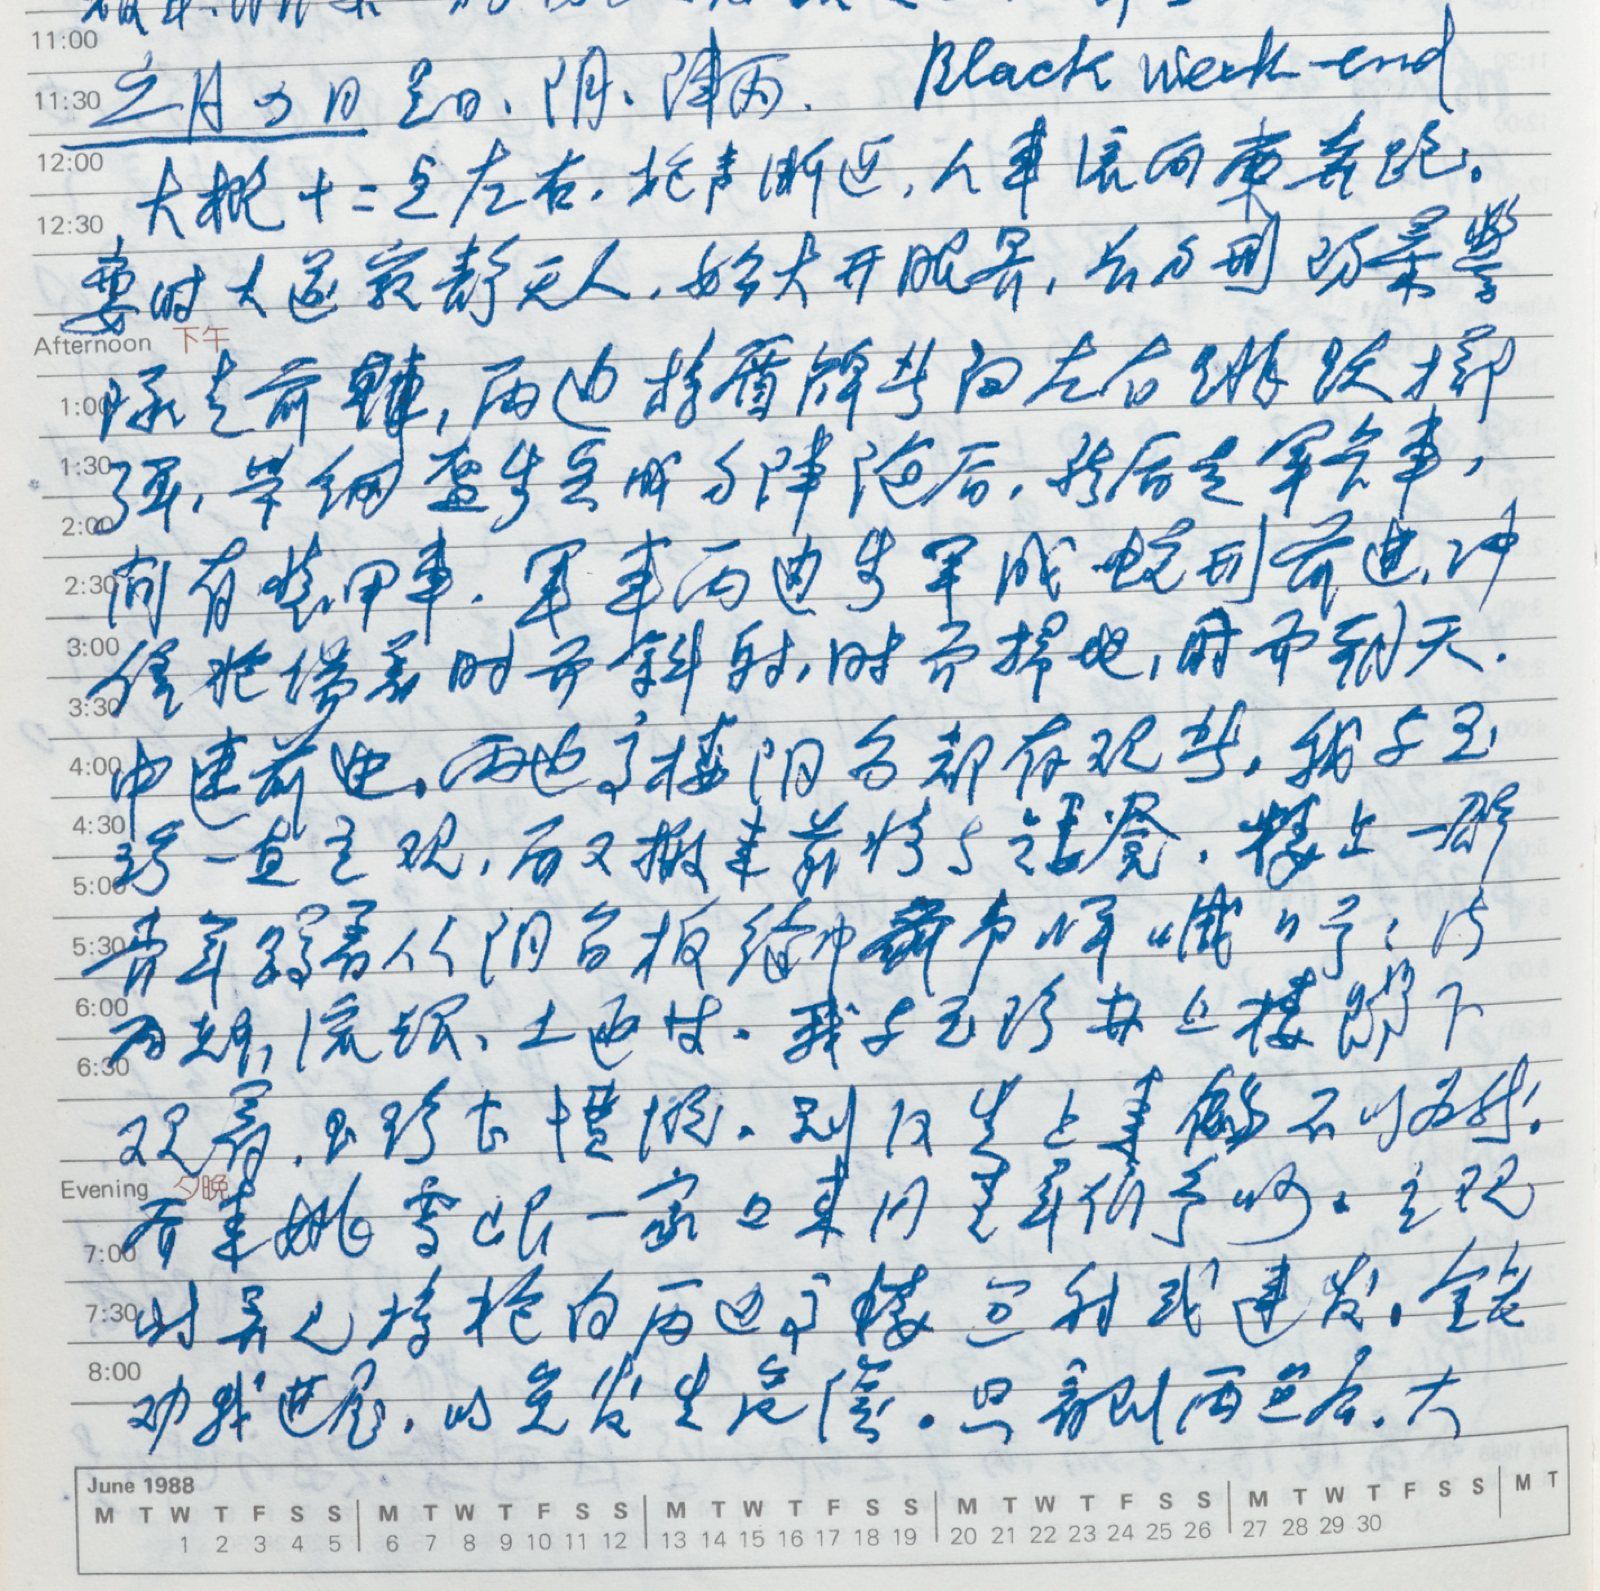 A page from the June 4, 1989, entry in the diary of Li Rui, one of Mao’s personal secretaries, with the heading ‘Black Week-end’. Image by Hoover Institution Archives.